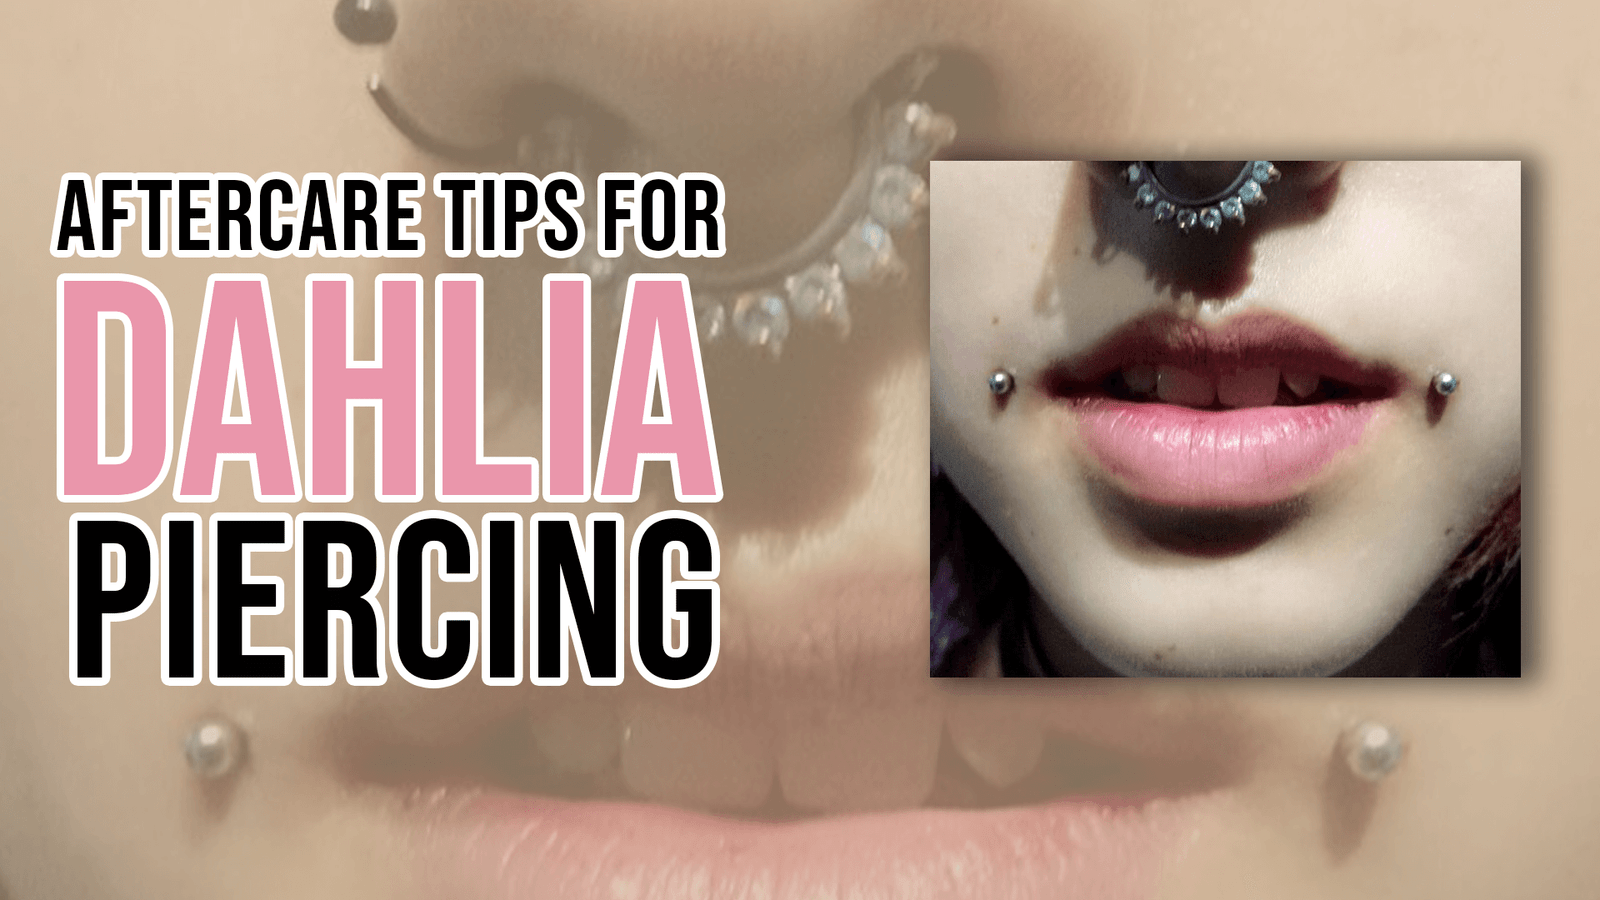 Aftercare Tips for Dahlia Piercing